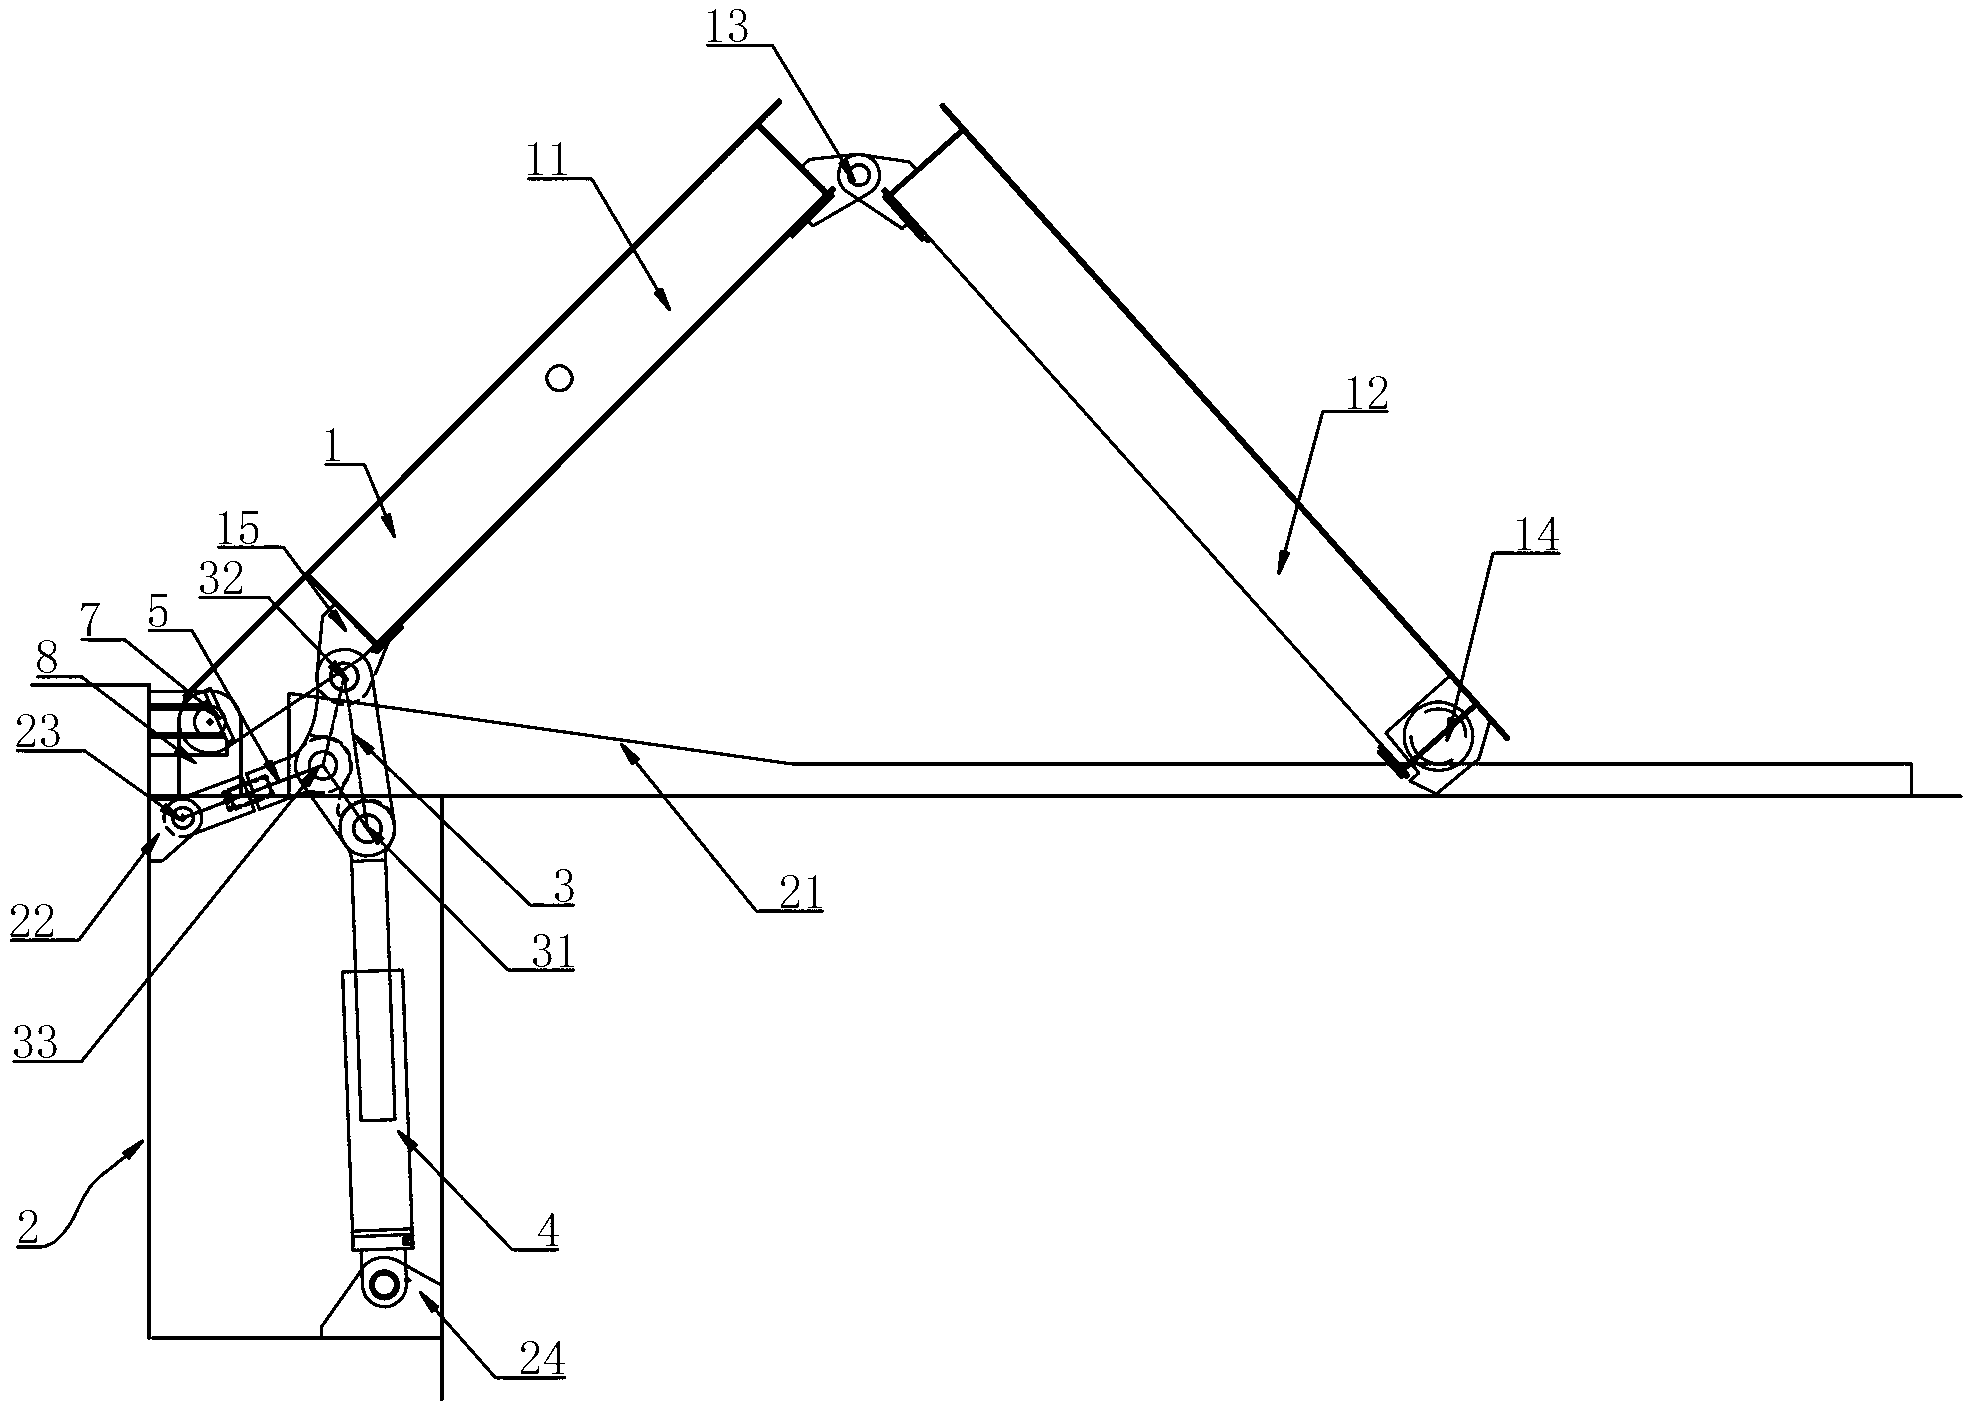 Hatch cover opening device